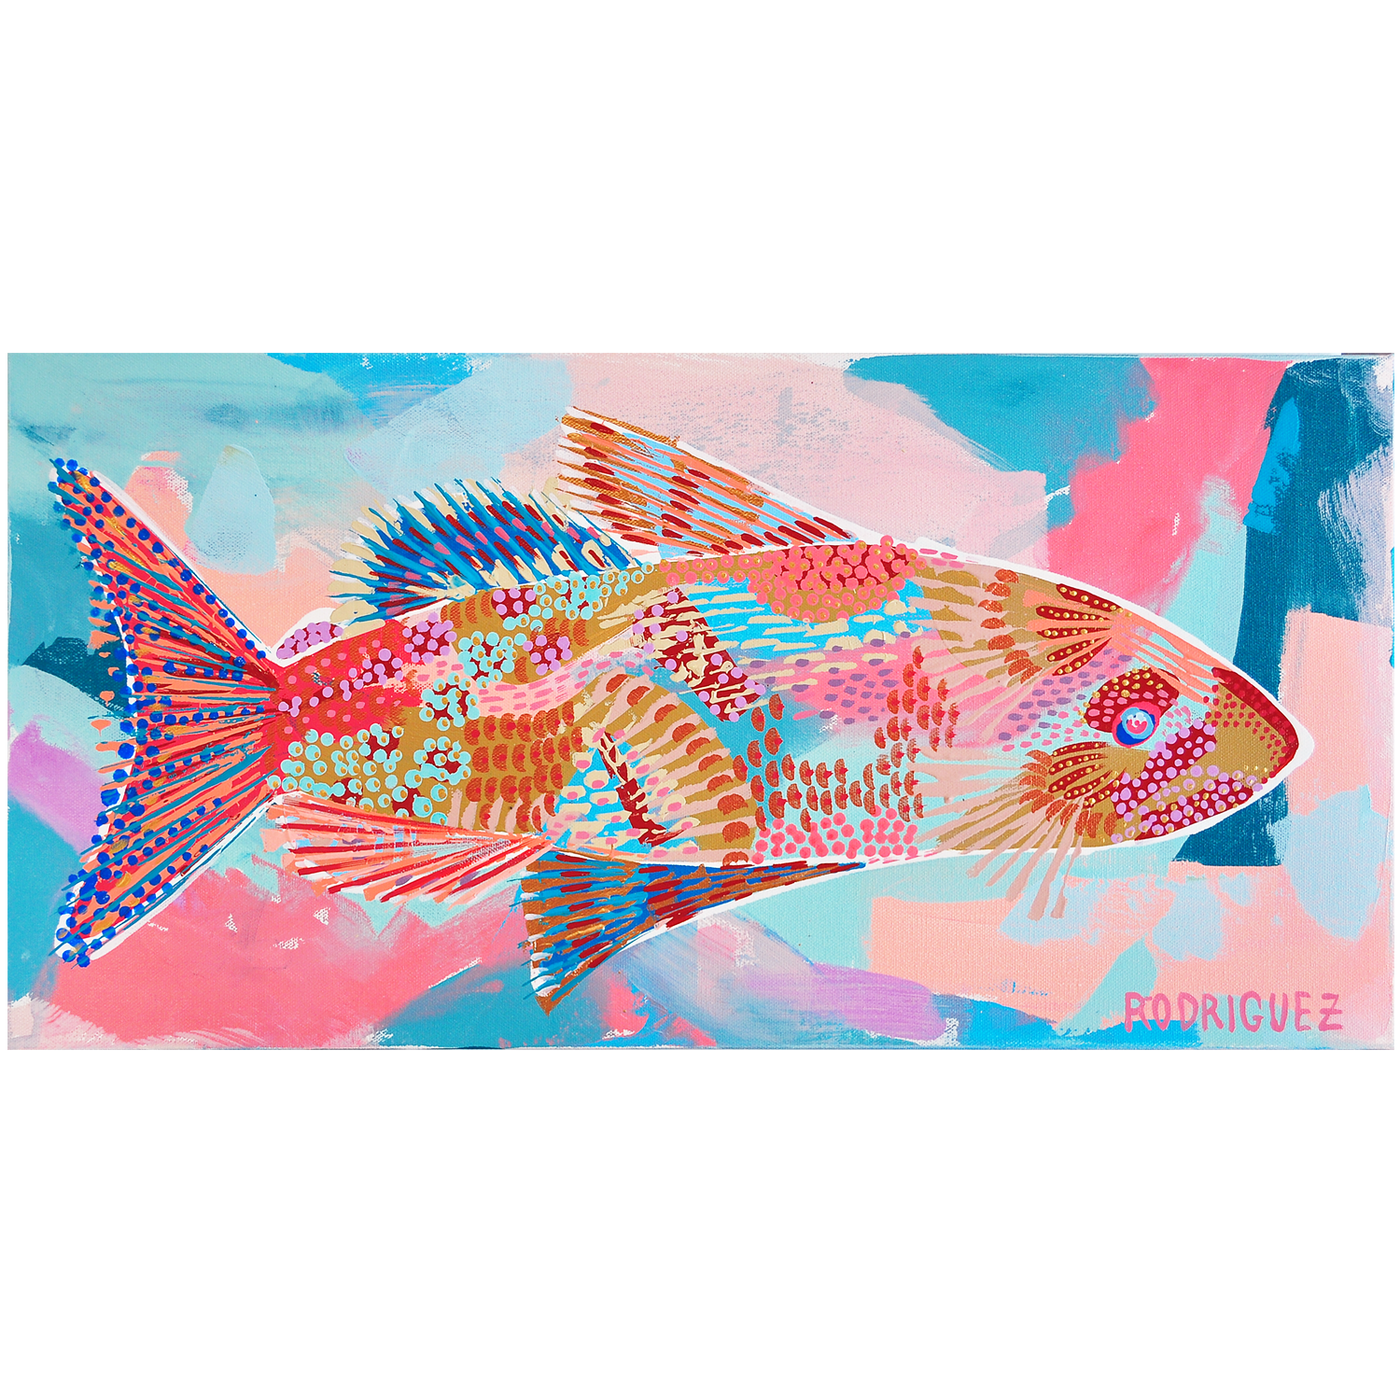 COTTON CANDY FISH 12x24 ON CANVAS